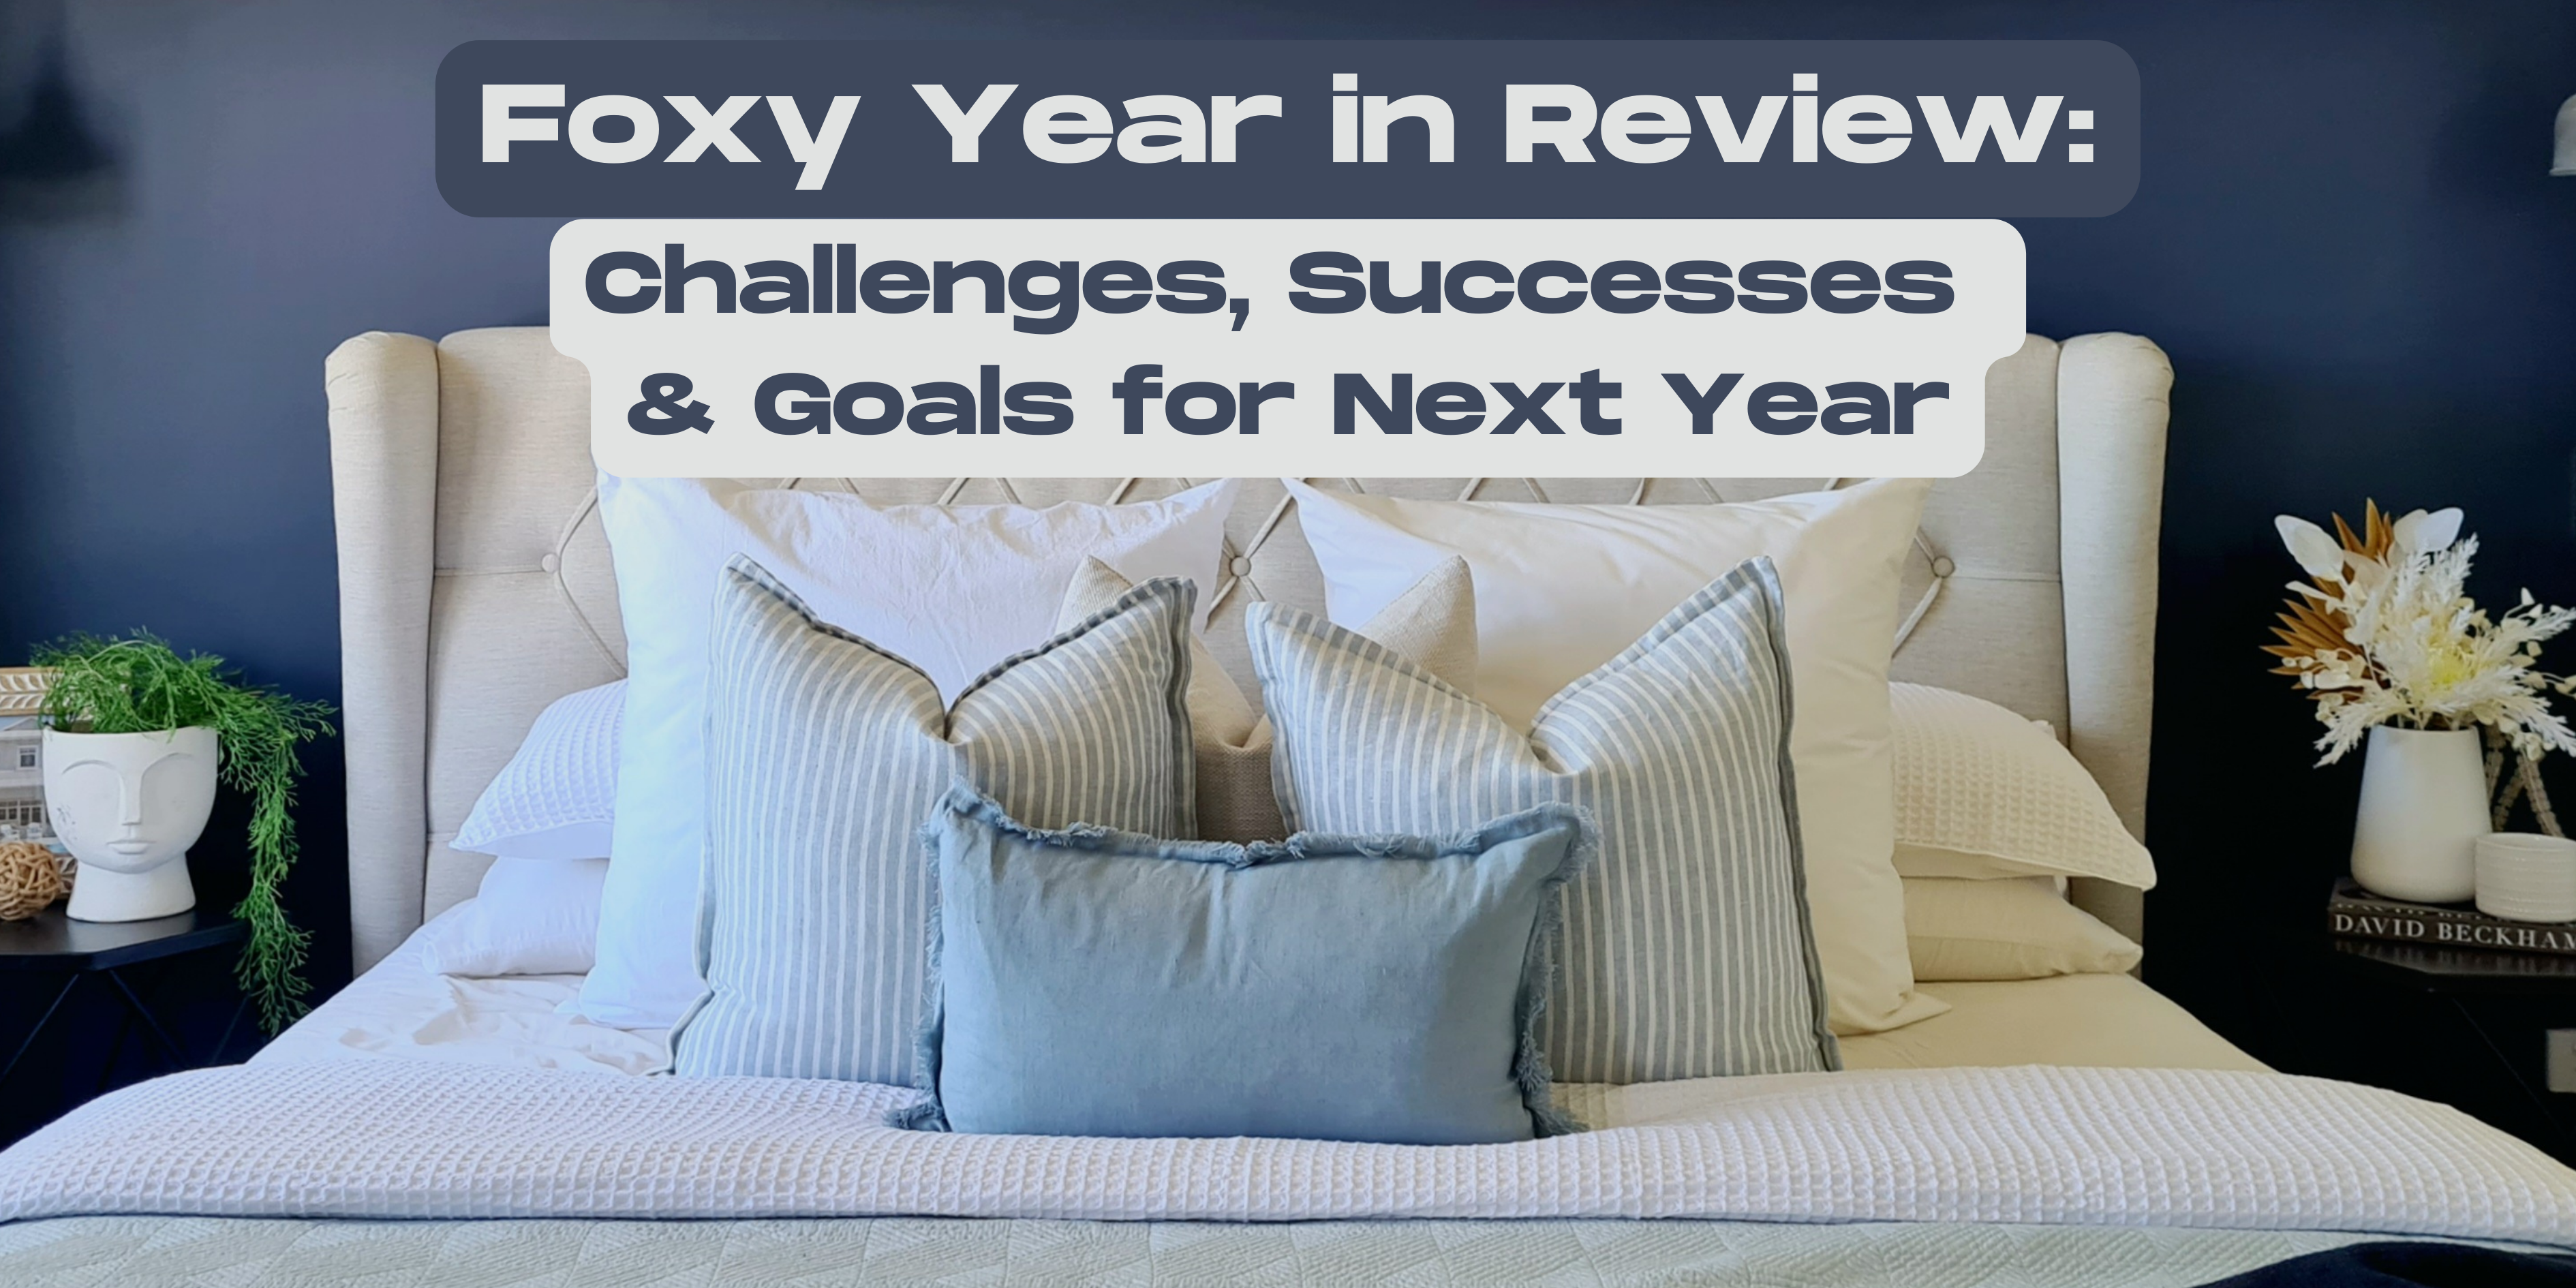 Foxy Year in Review Challenges and Successes